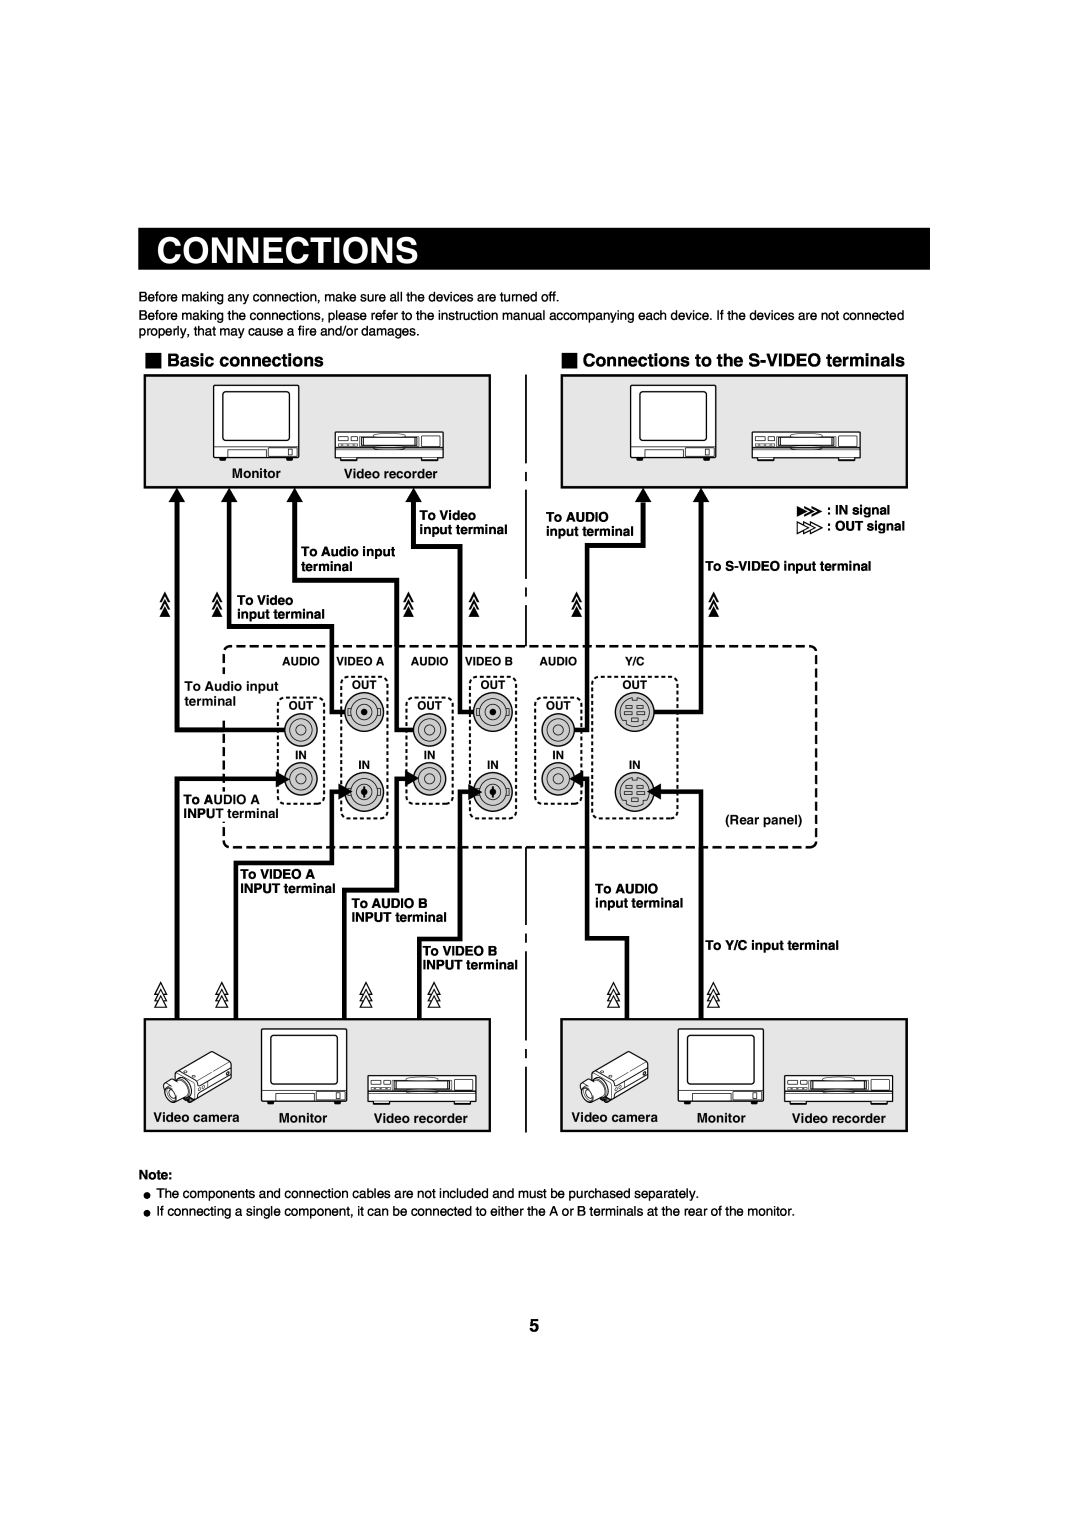 Sanyo VMC-8620 instruction manual Basic connections, Connections to the S-VIDEOterminals 